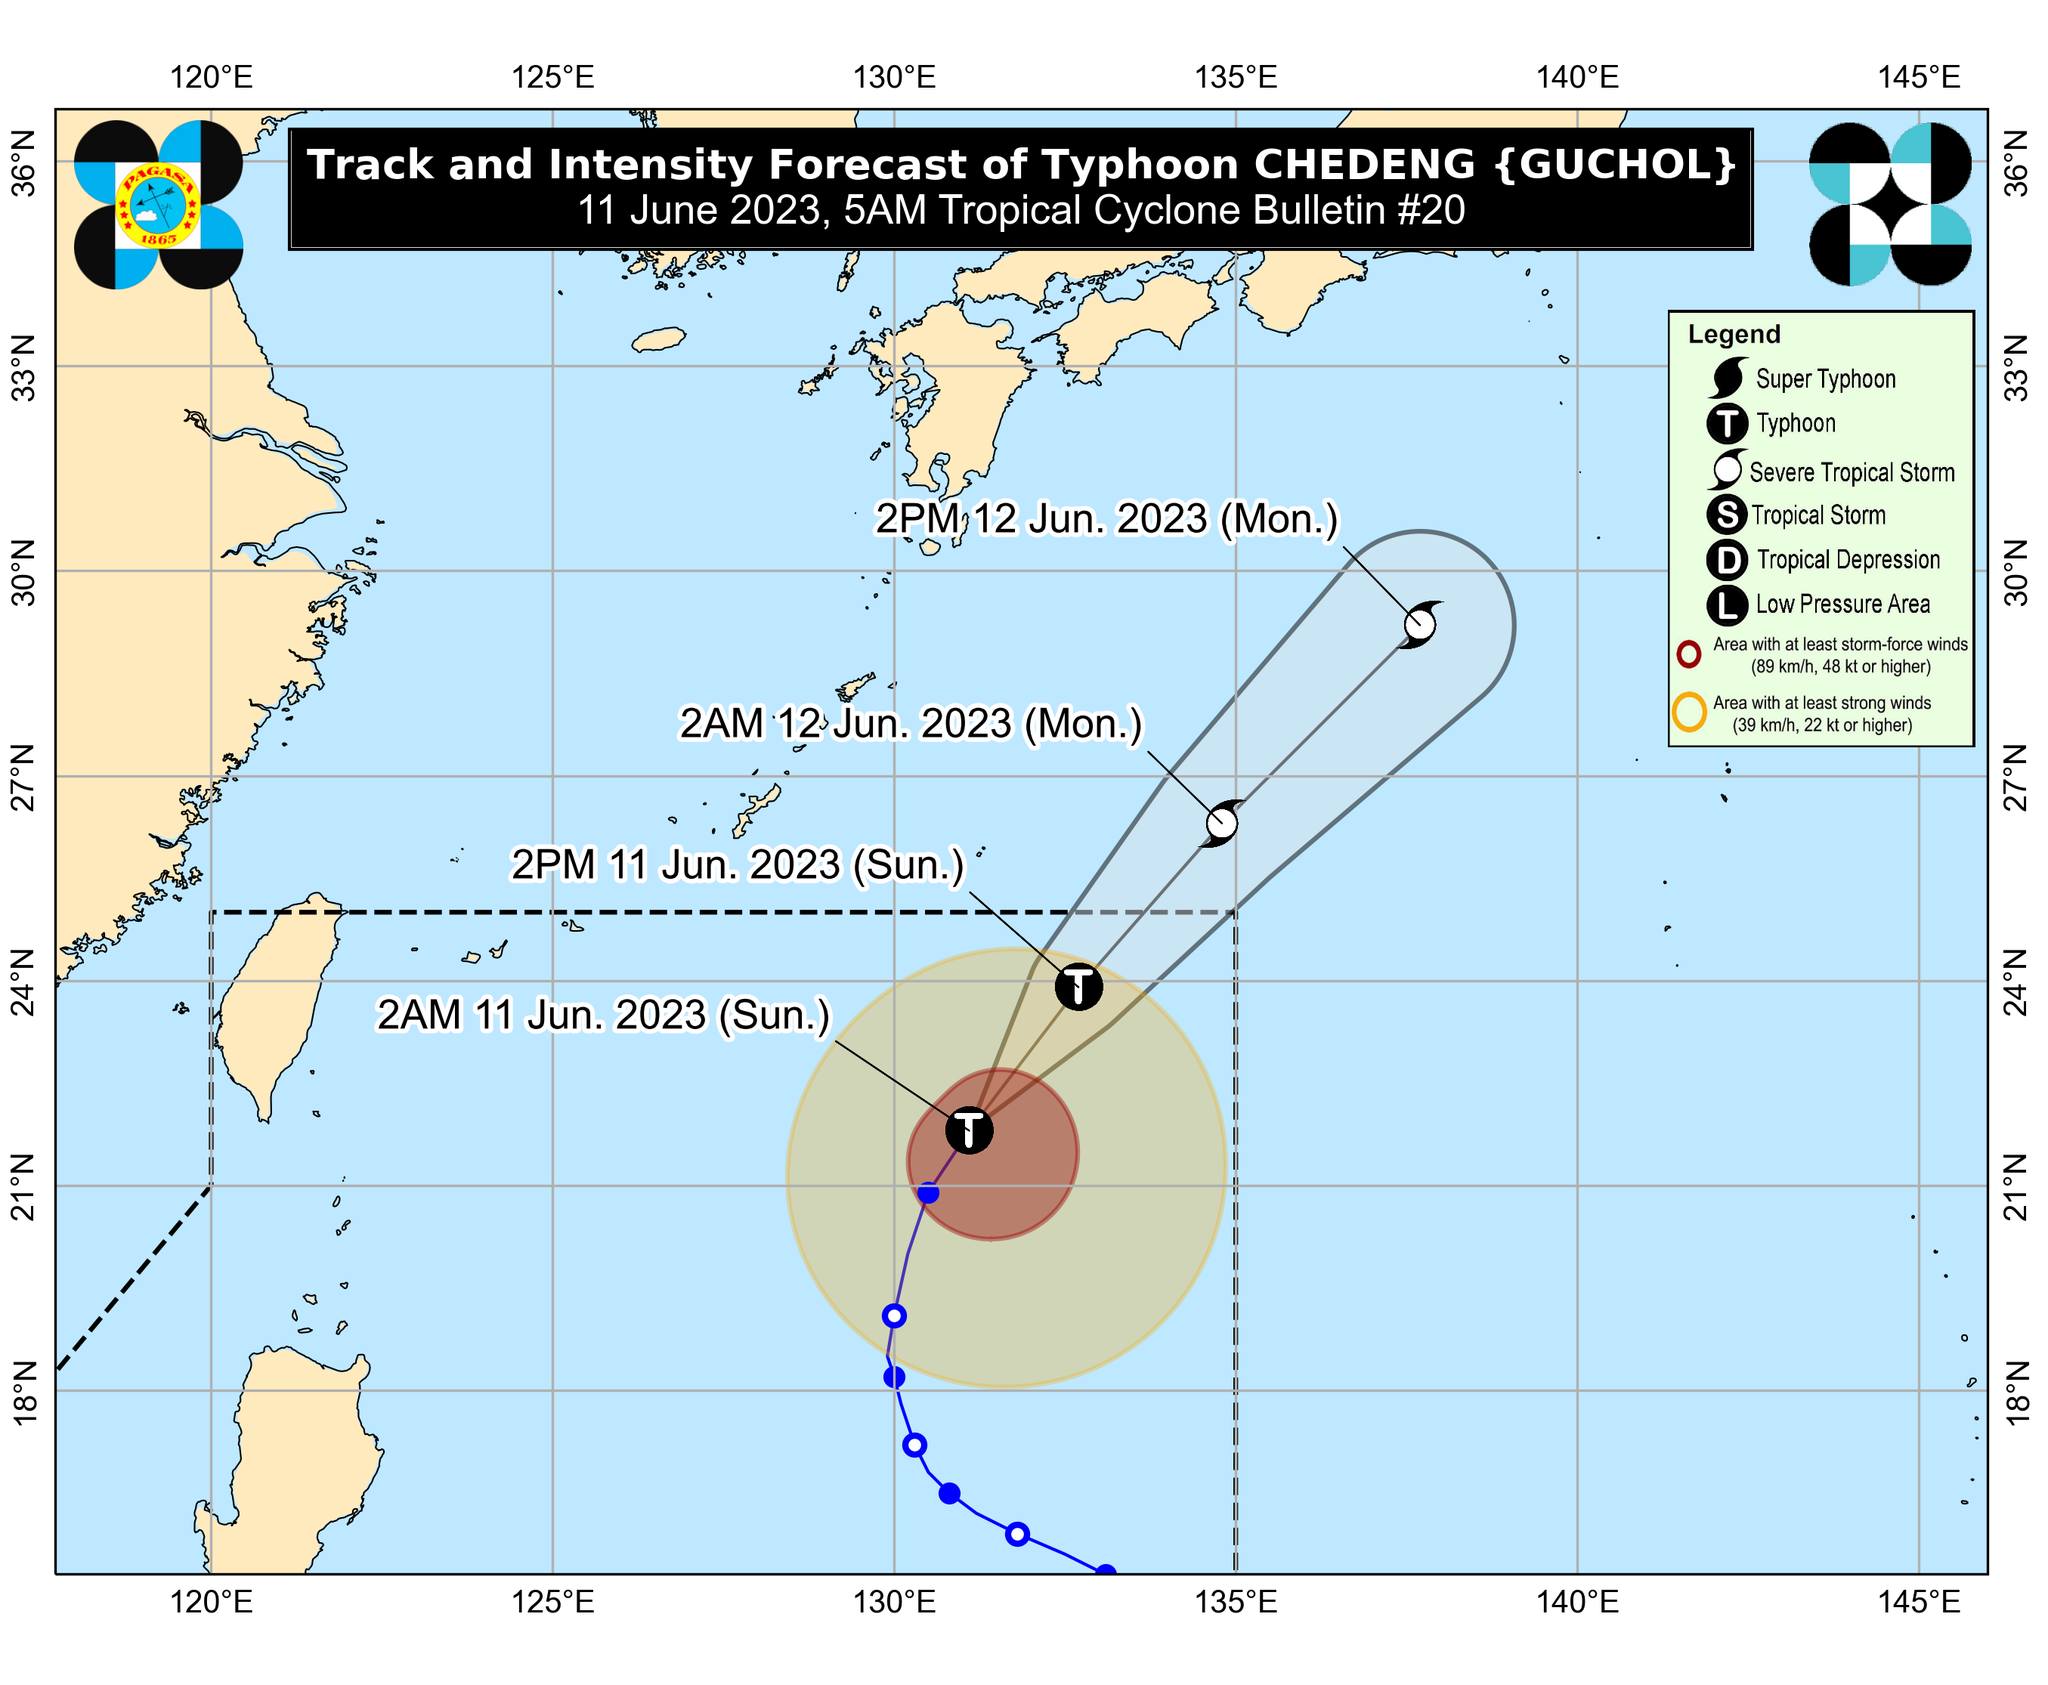 Chedeng further weakens, accelerates away from Philippine landmass.